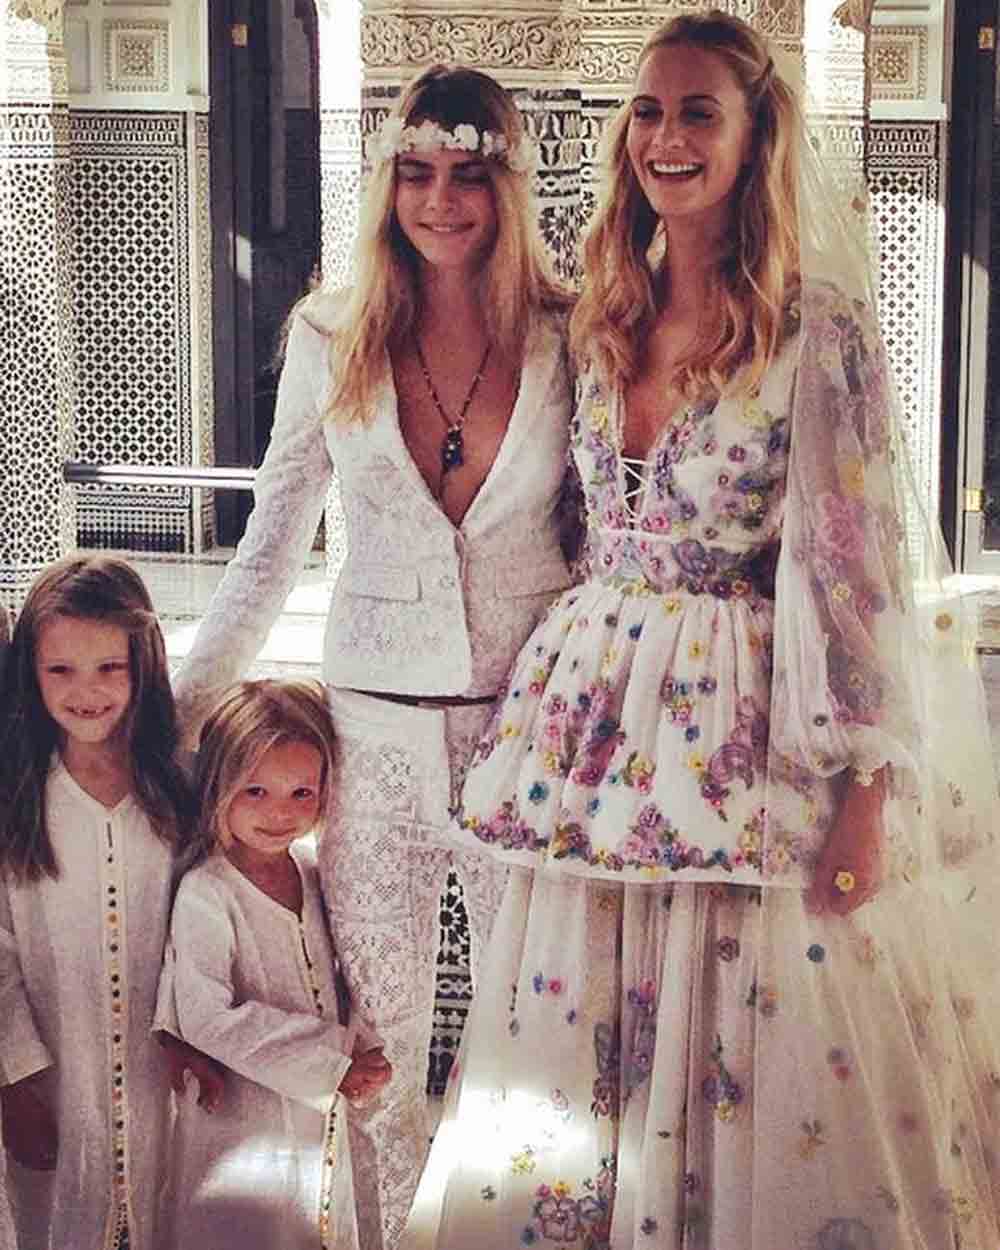 Poppy Delevingne wearing a custom Chanel Couture wedding gown